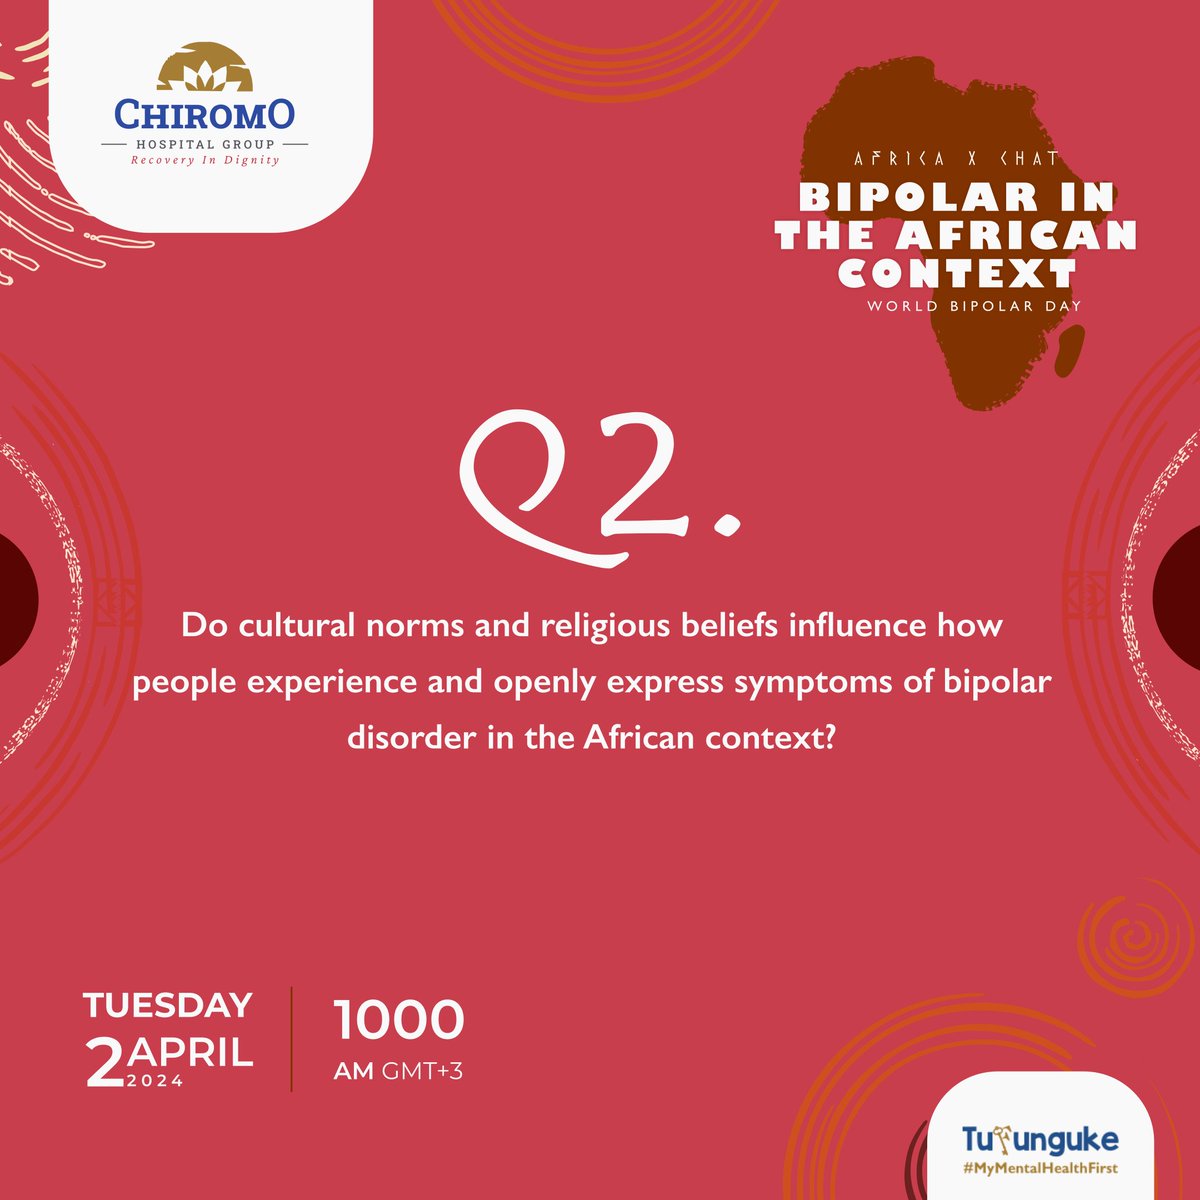 Q2. Do cultural norms and religious beliefs influence how people experience and openly express symptoms of bipolar disorder in the African context? @LucyW_Wanjohi @JanetMonda @MMonica_Musyoka @karnavpanda @khannafisa04 @w_mwangi19 @winfrey_milton @G_Mbugua1 @ChristineOmbima